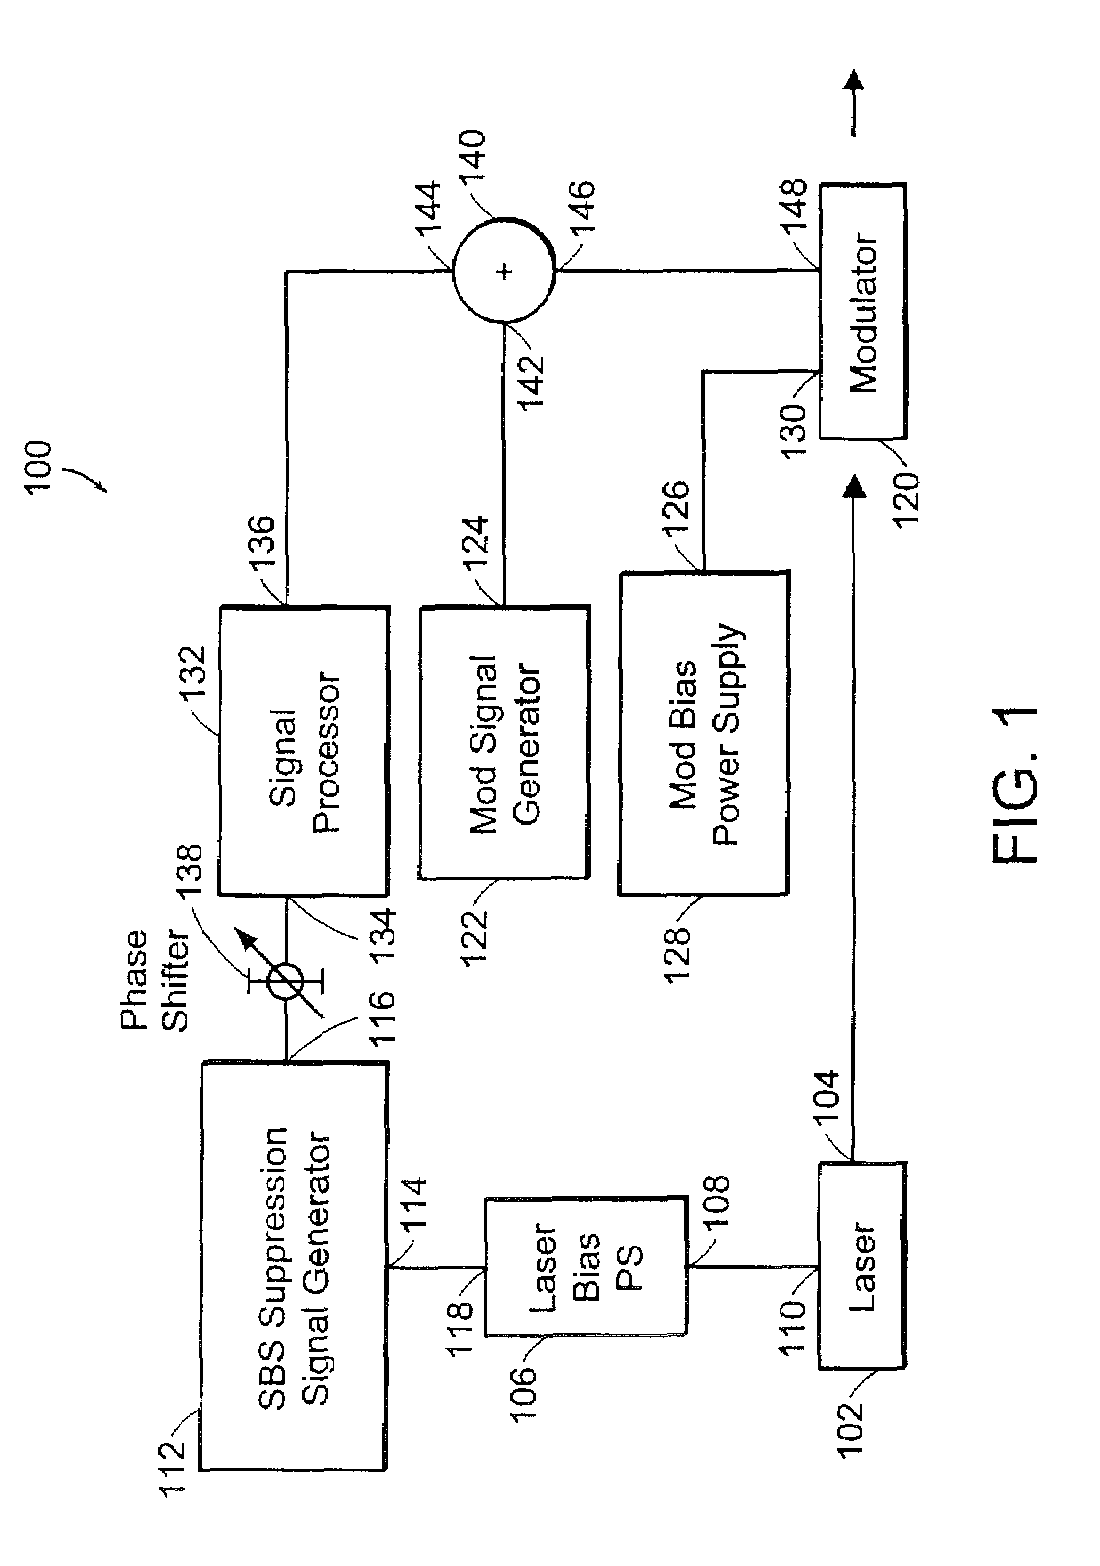 Optical transmitter with SBS suppression